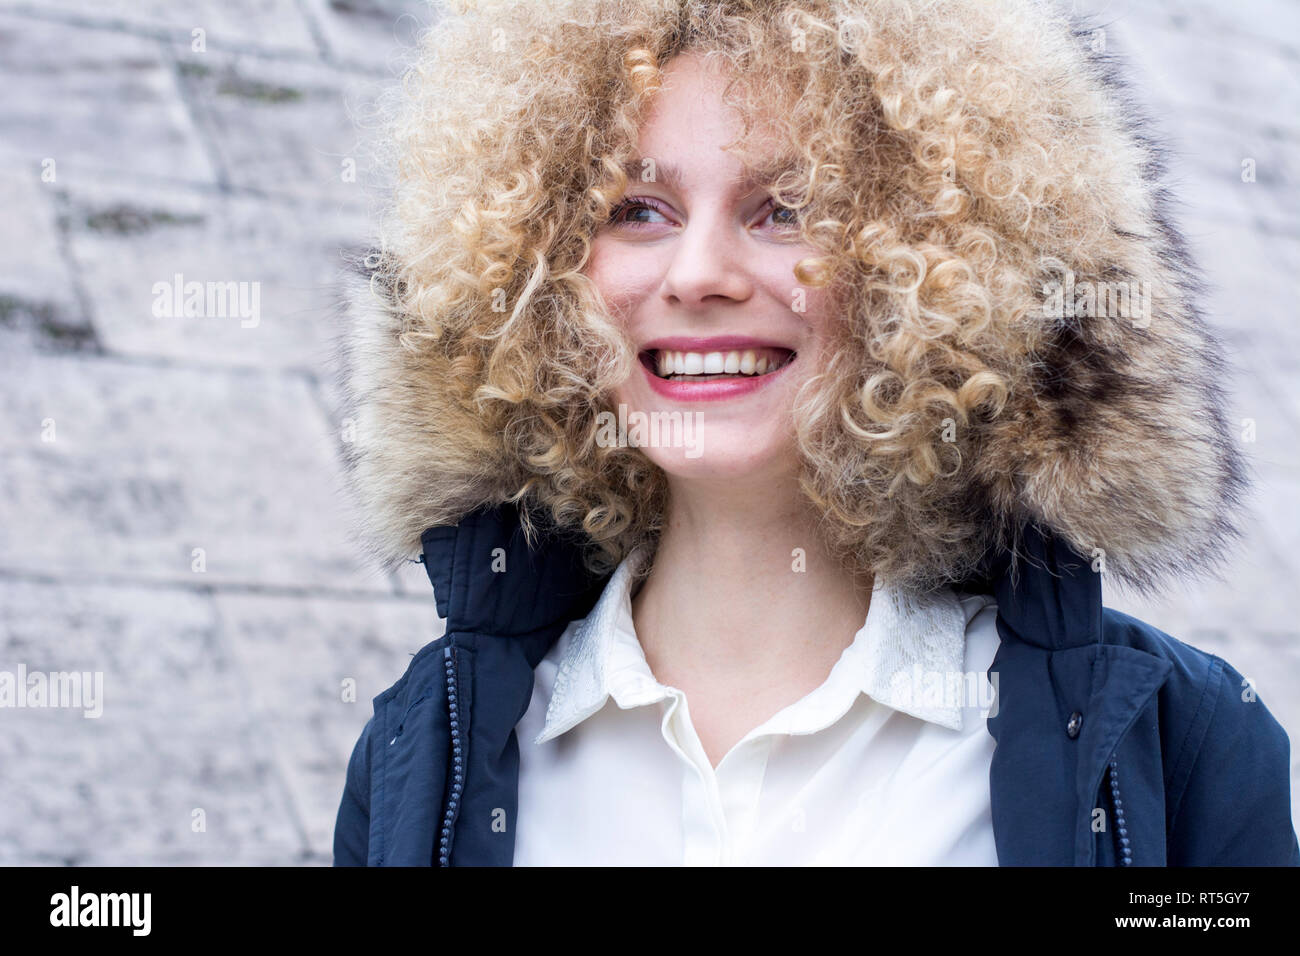 Portrait of laughing blond woman with ringlets wearing fur hood Stock Photo